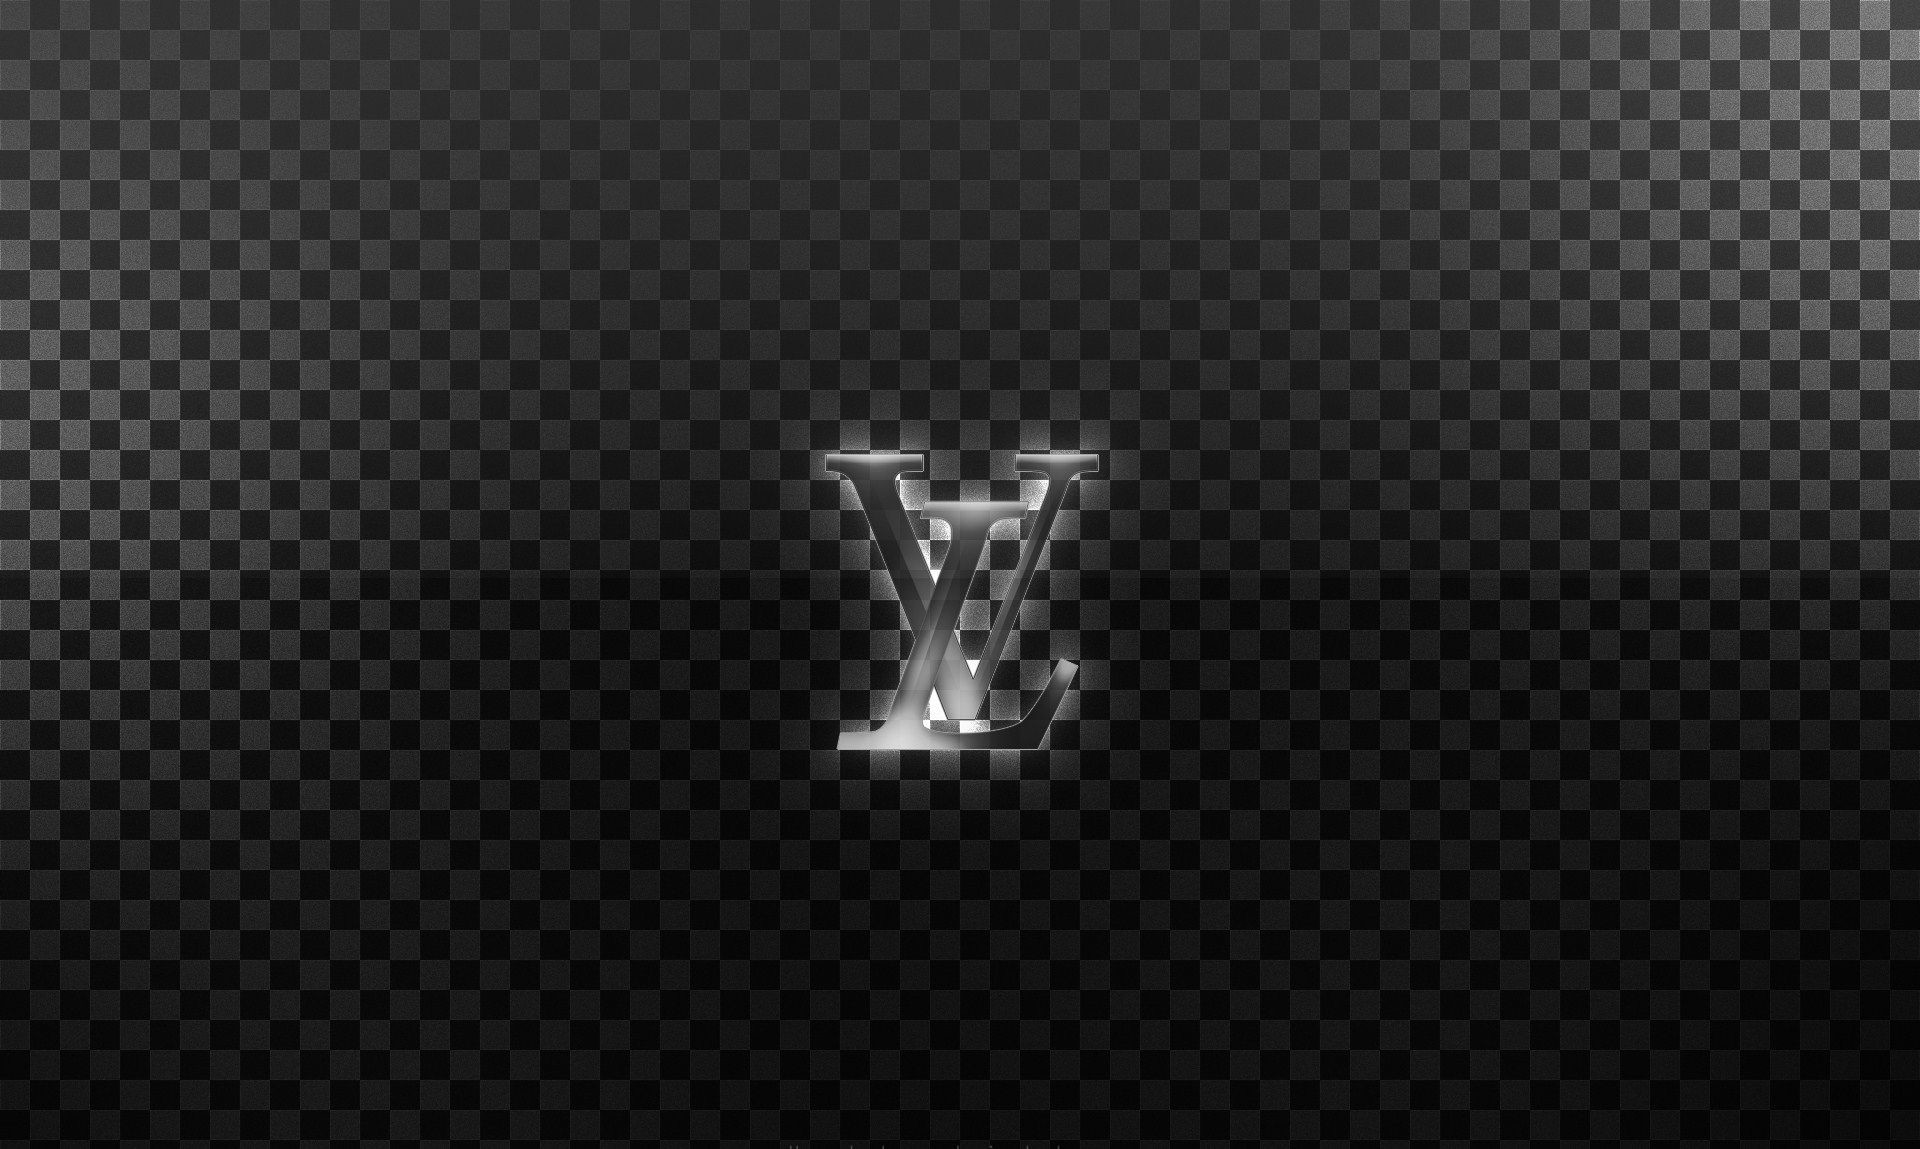 1920x1149 logo louis vuitton backgrounds pictures download hd background wallpapers  free amazing cool tablet smart phone high